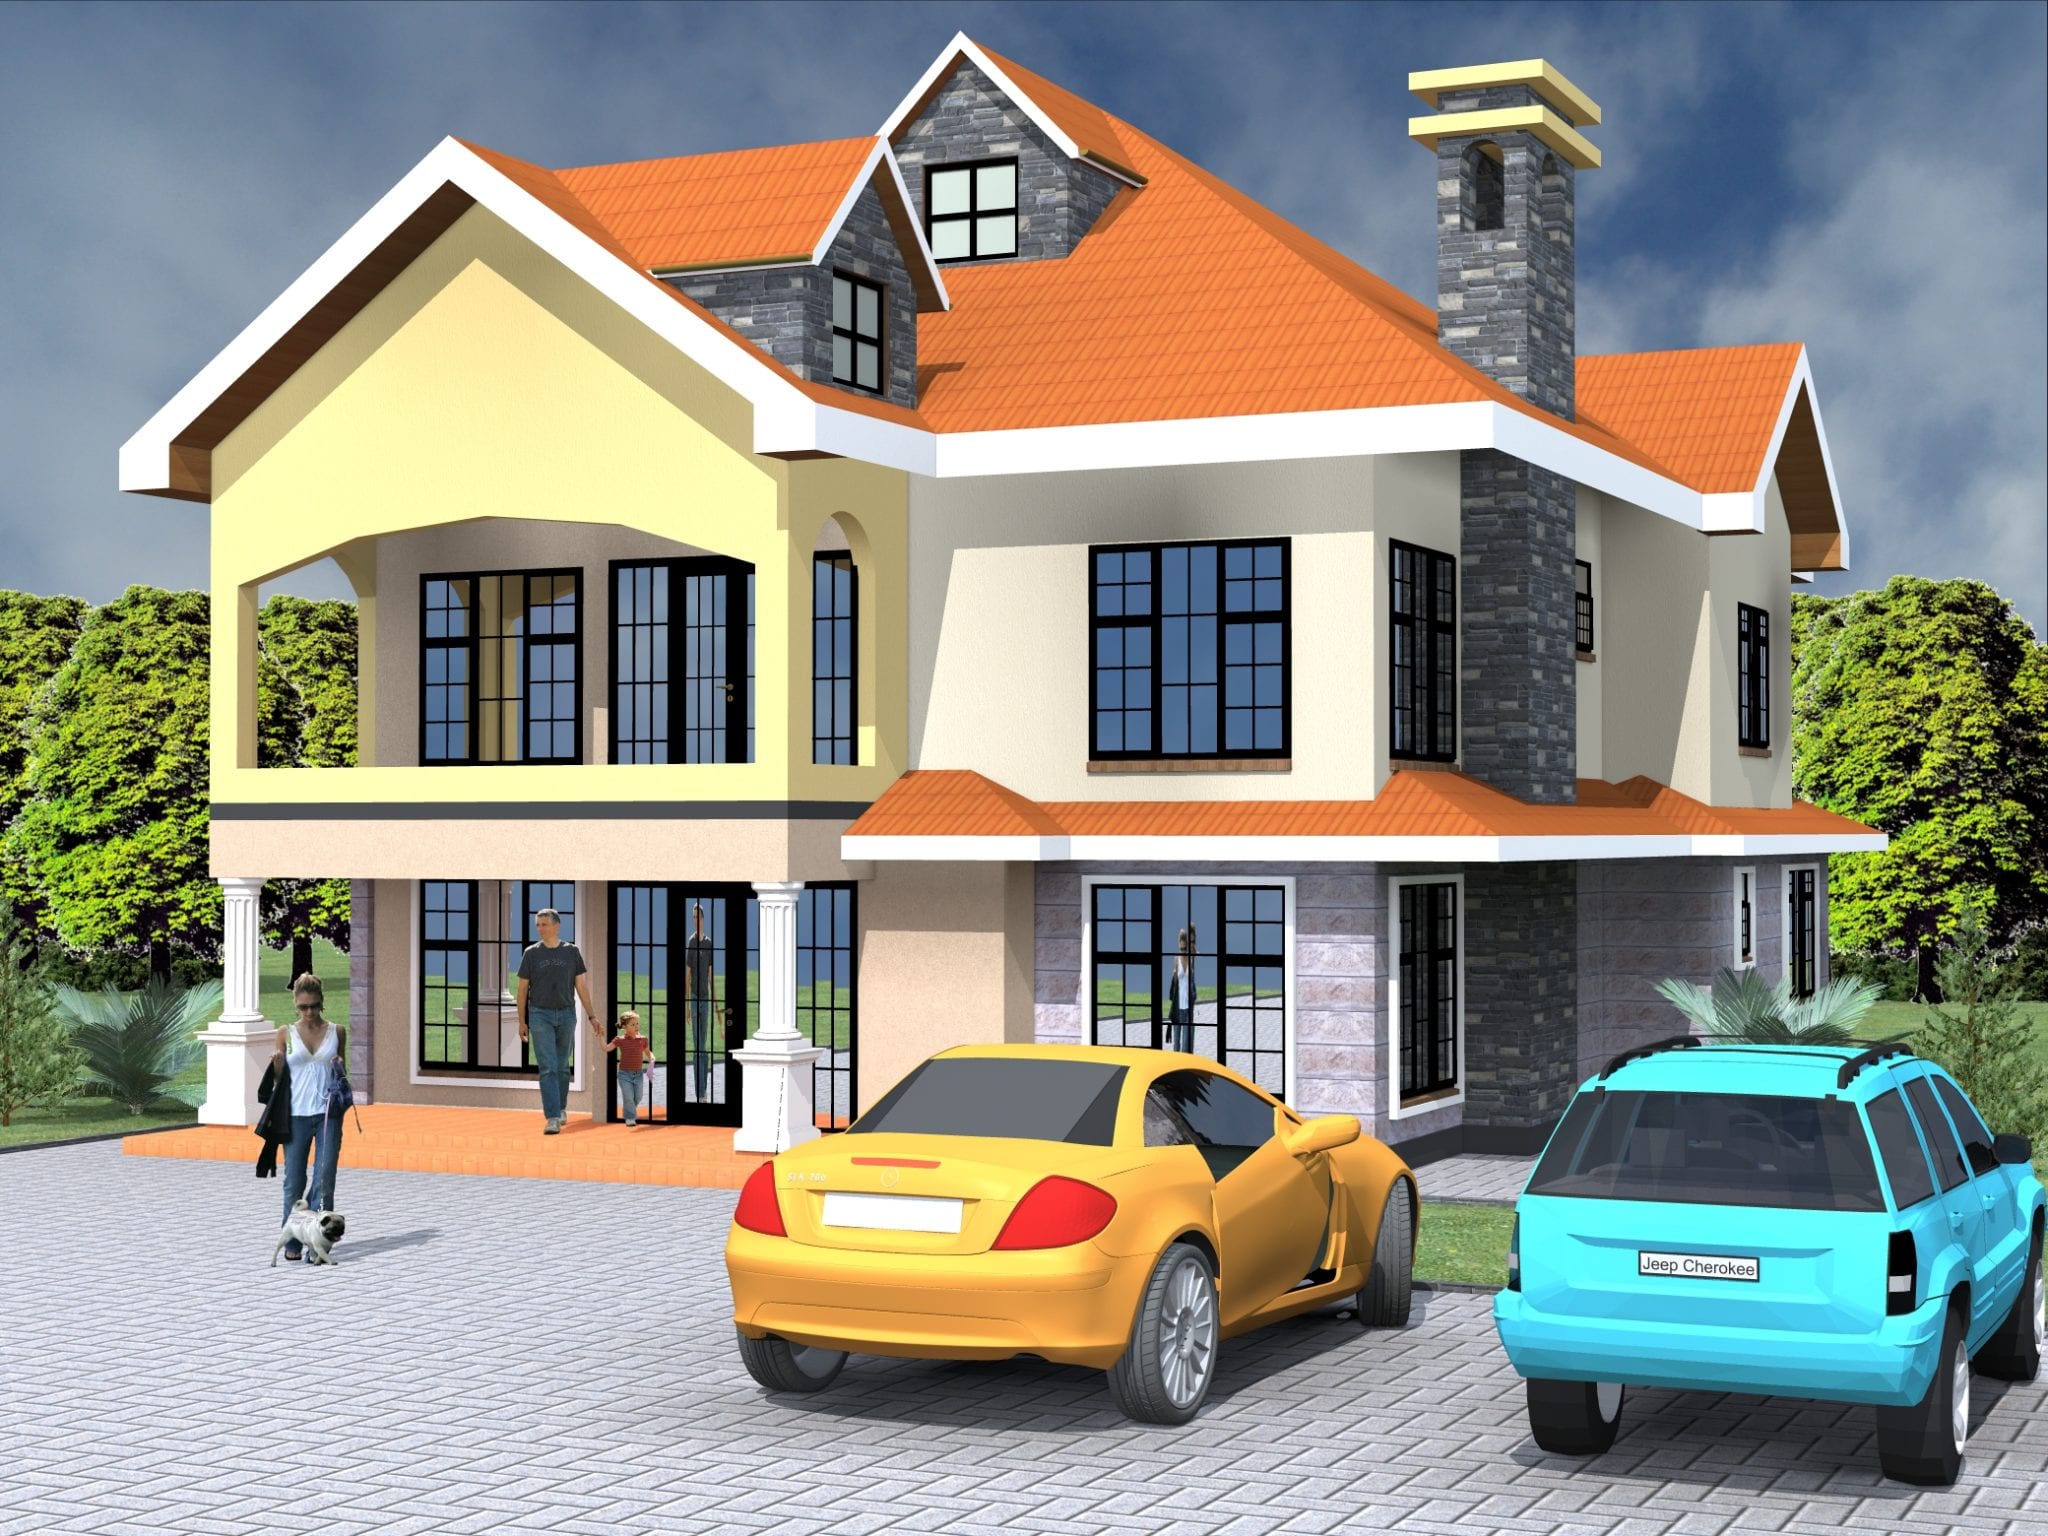 Simple Four Bedroom House Plans Designs |HPD Consult